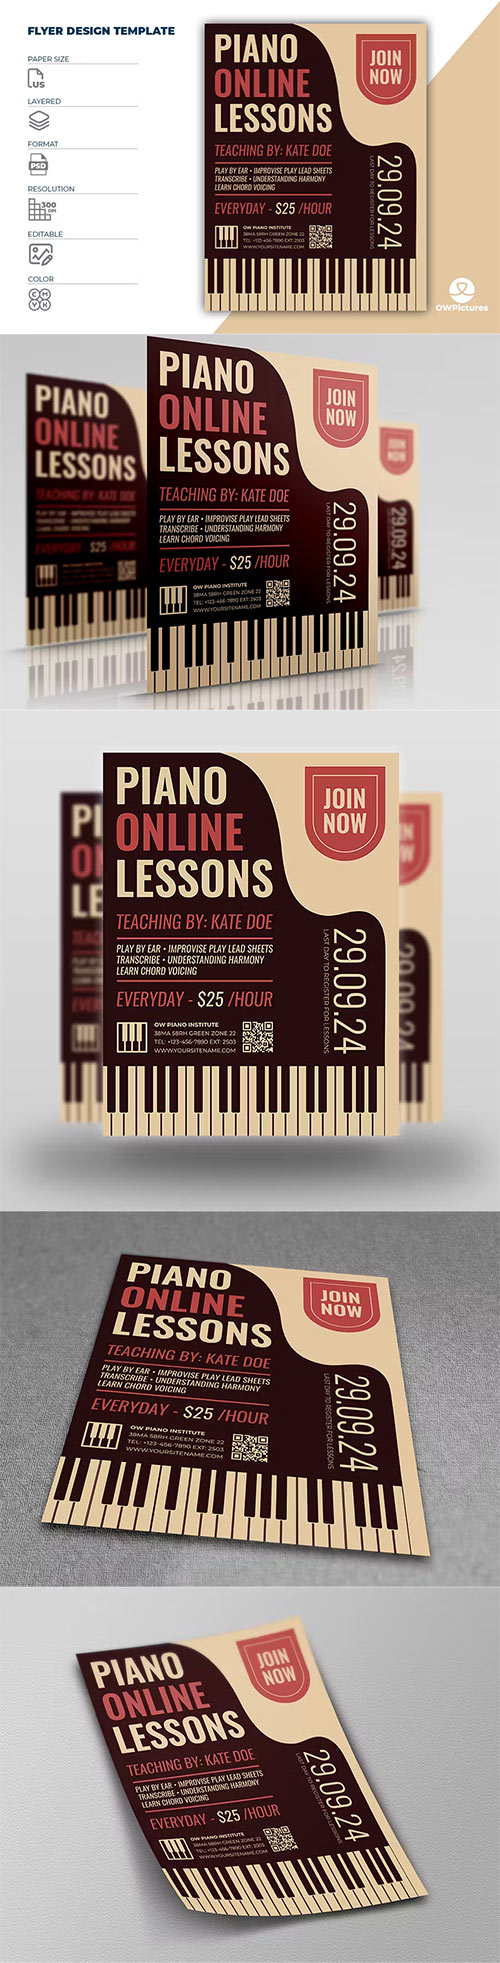 Piano Lessons Flyer Template TKNLPZR